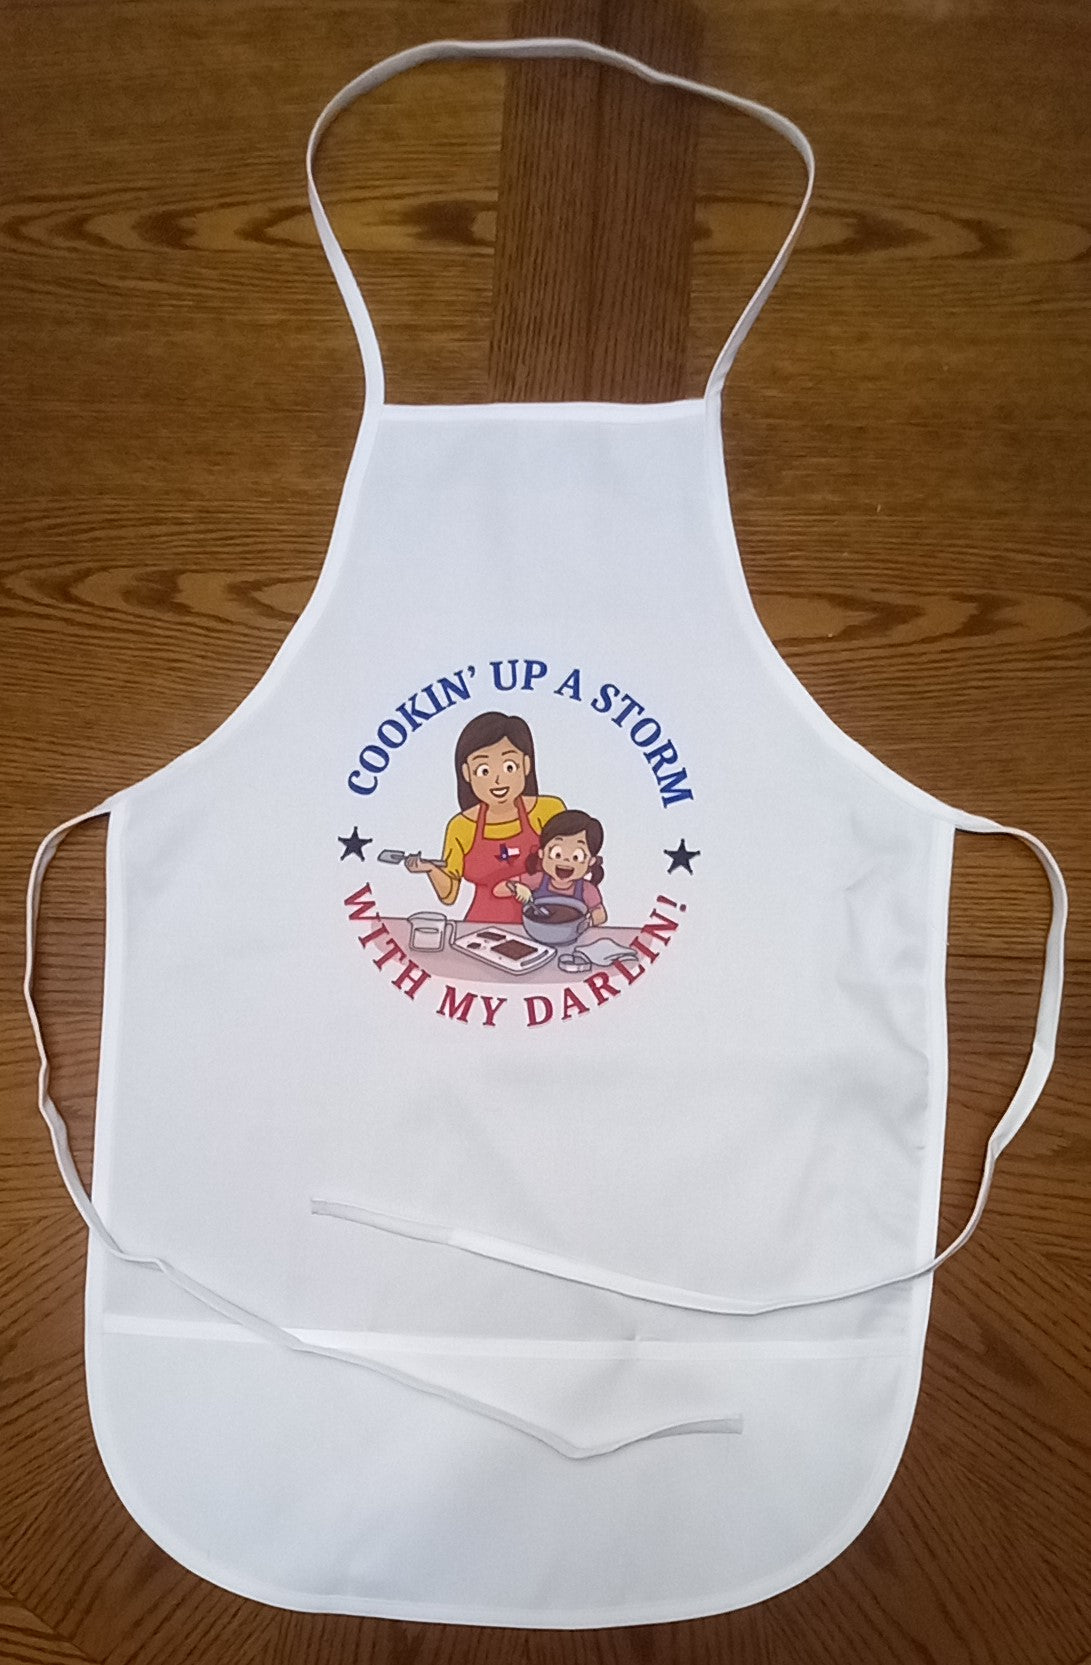 Mommy & Me "Cookin' Up A Storm!" Apron and Tumbler Set